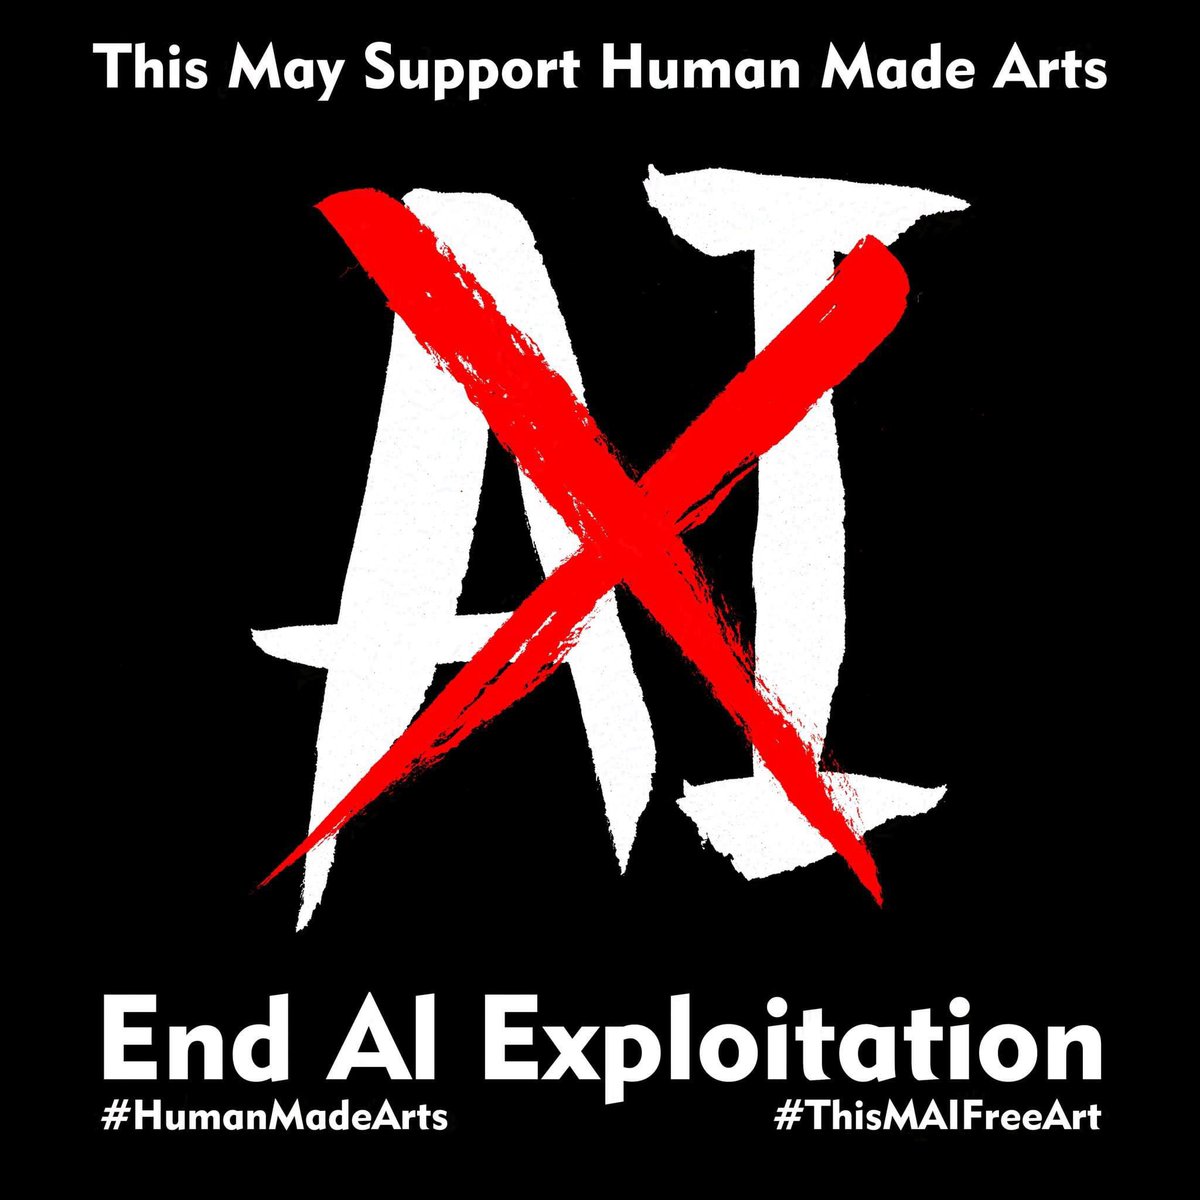 Here’s the prompt list for this May! A ‘pro human’ information campaign and art challenge to promote human made Arts, and raise awareness of the issues around generative image tech!      
#ThisMAIFreeArt #NoAI #IsupportHumanMadeArts 
humanmadearts.org